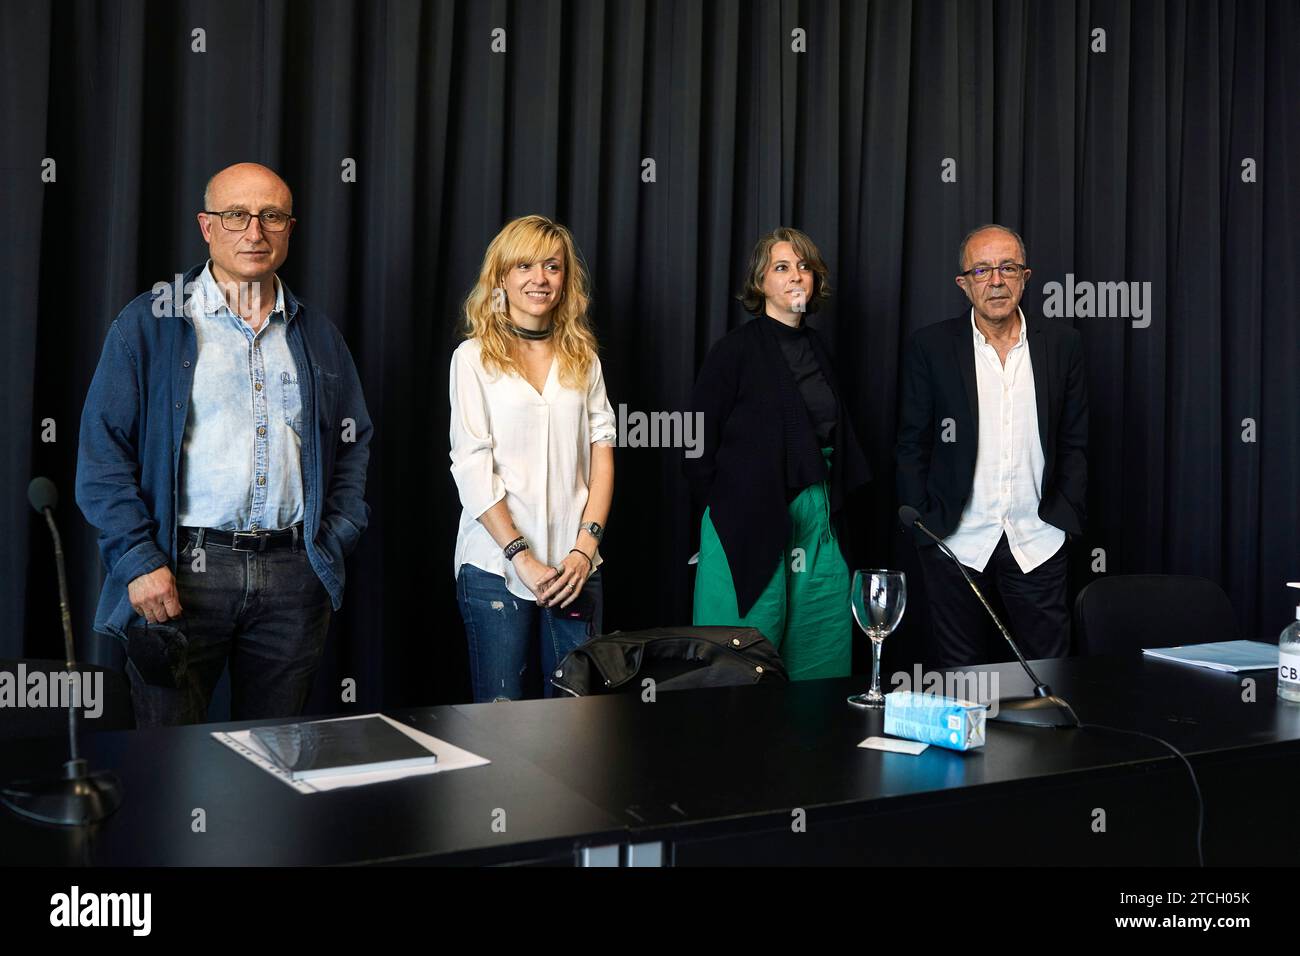 Madrid, 05/26/2021. Circle of Fine Arts. Presentation of the Photography and Image Center Platform. At the table (left to right) Juan Manuel Castro Prieto, Andrea Obieto, Sandra Maunat and Alejandro Castellote. César Lucas, Ramón Masats and Juan María Rodríguez, among others, also attend. Photo: Guillermo Navarro. ARCHDC. Credit: Album / Archivo ABC / Guillermo Navarro Stock Photo